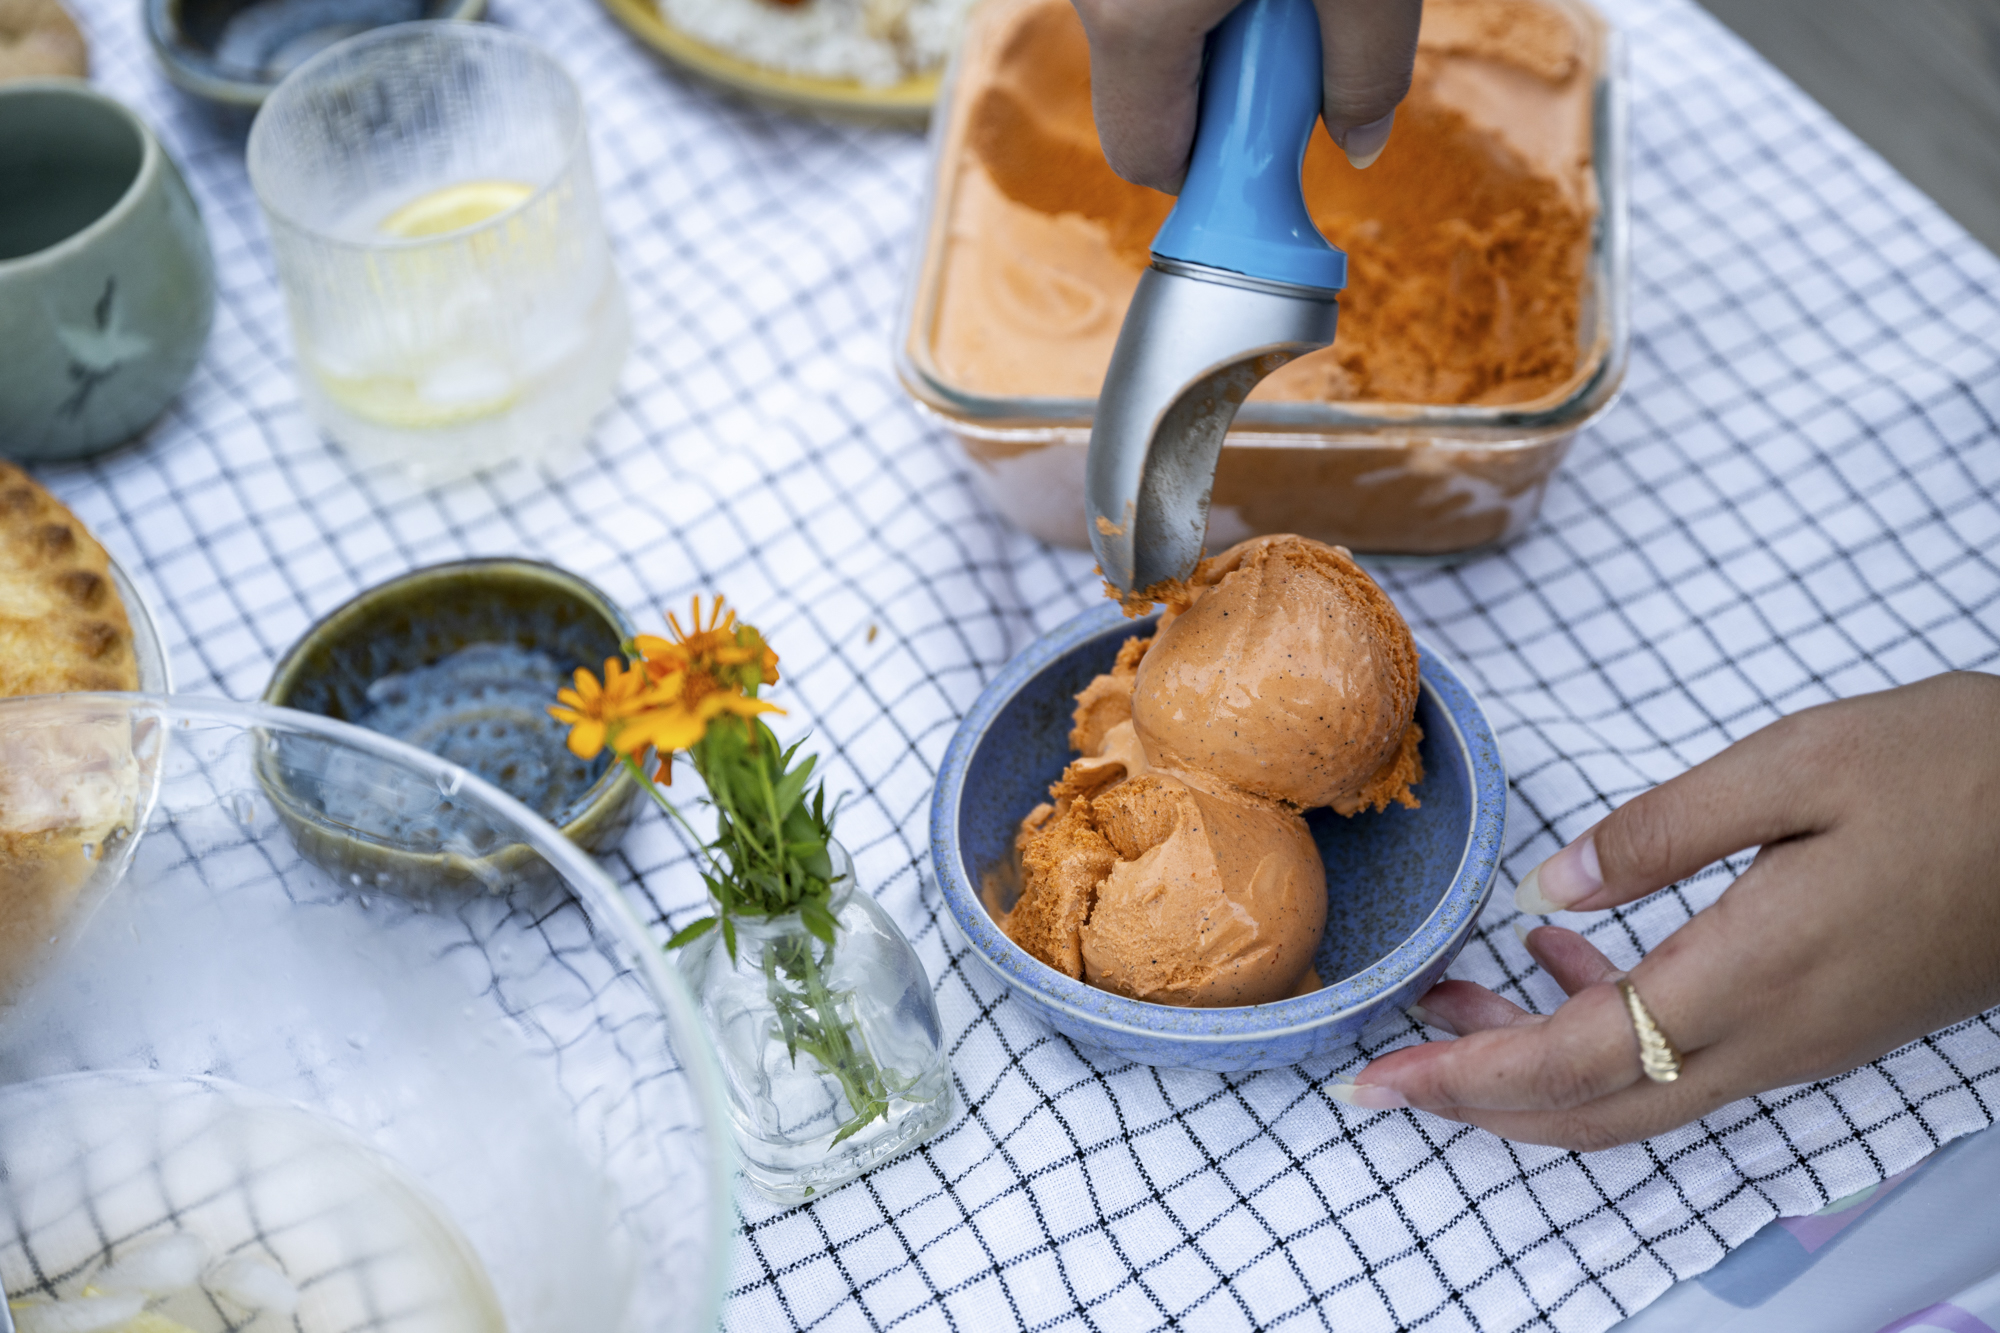 A person serves themselves brownish orange-colored ice cream at a picnic table set with a tablecloth and a meal.